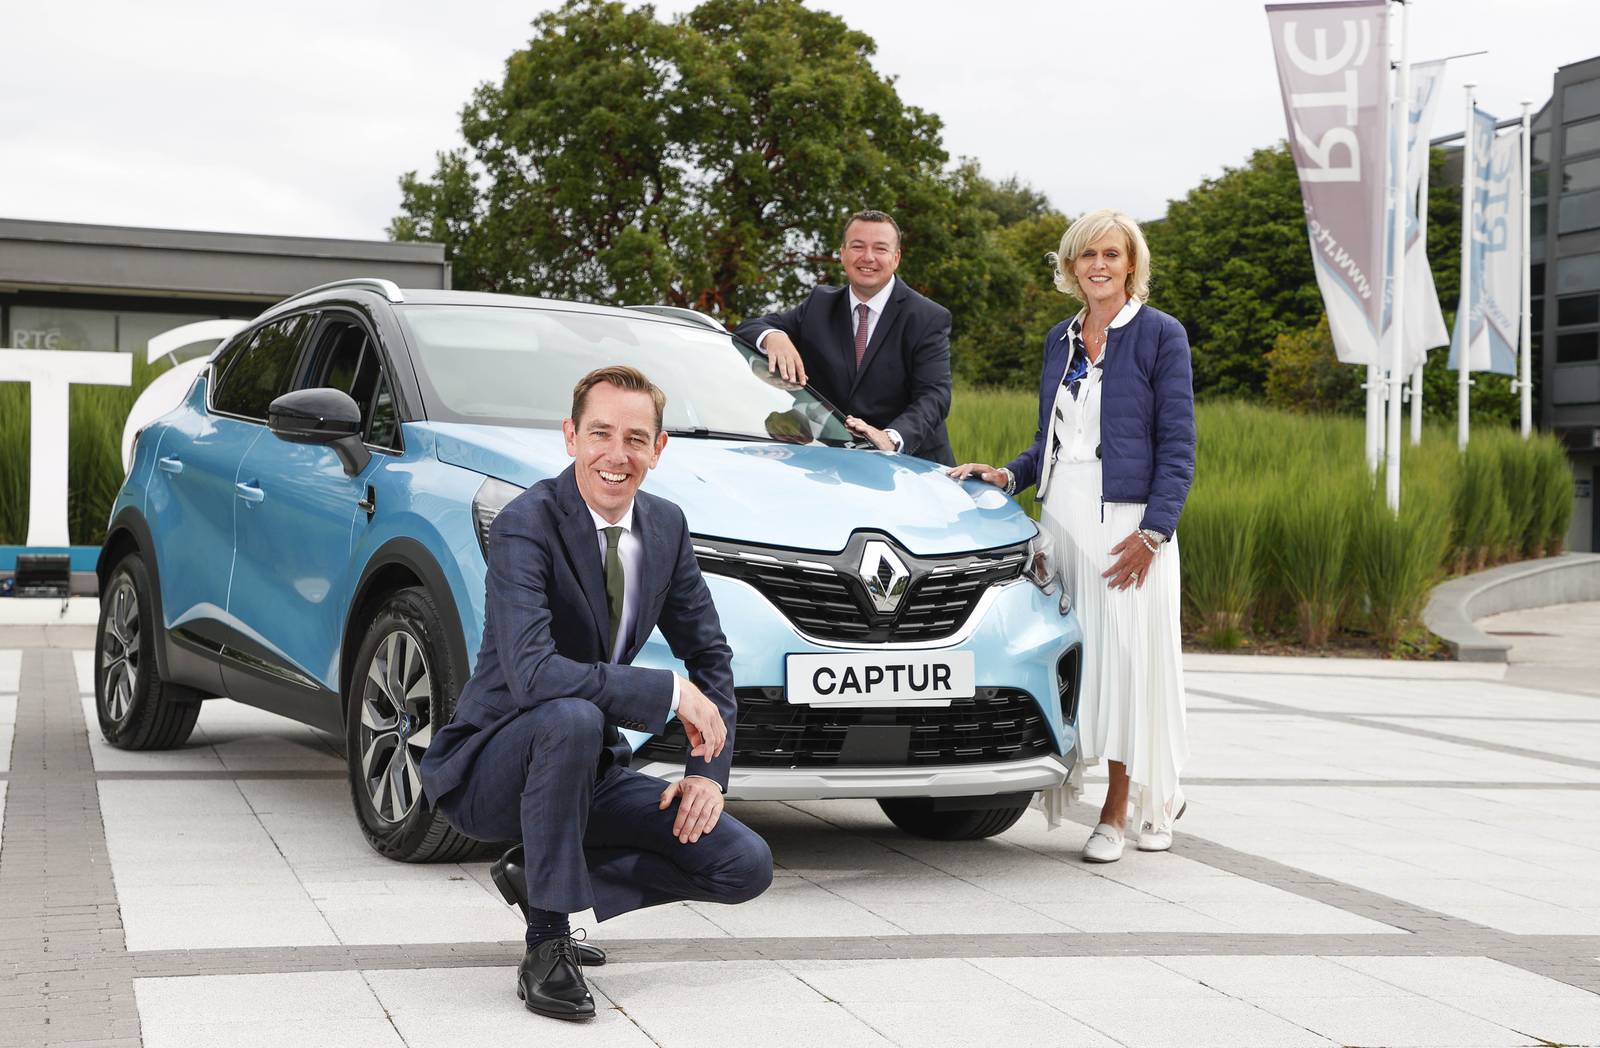 The Late Late Show Host Ryan Tubridy with Patrick Magee Country Operations Director Renault Group and former RTÉ Commercial Director Geraldine O'Leary. Photograph: Conor McCabe